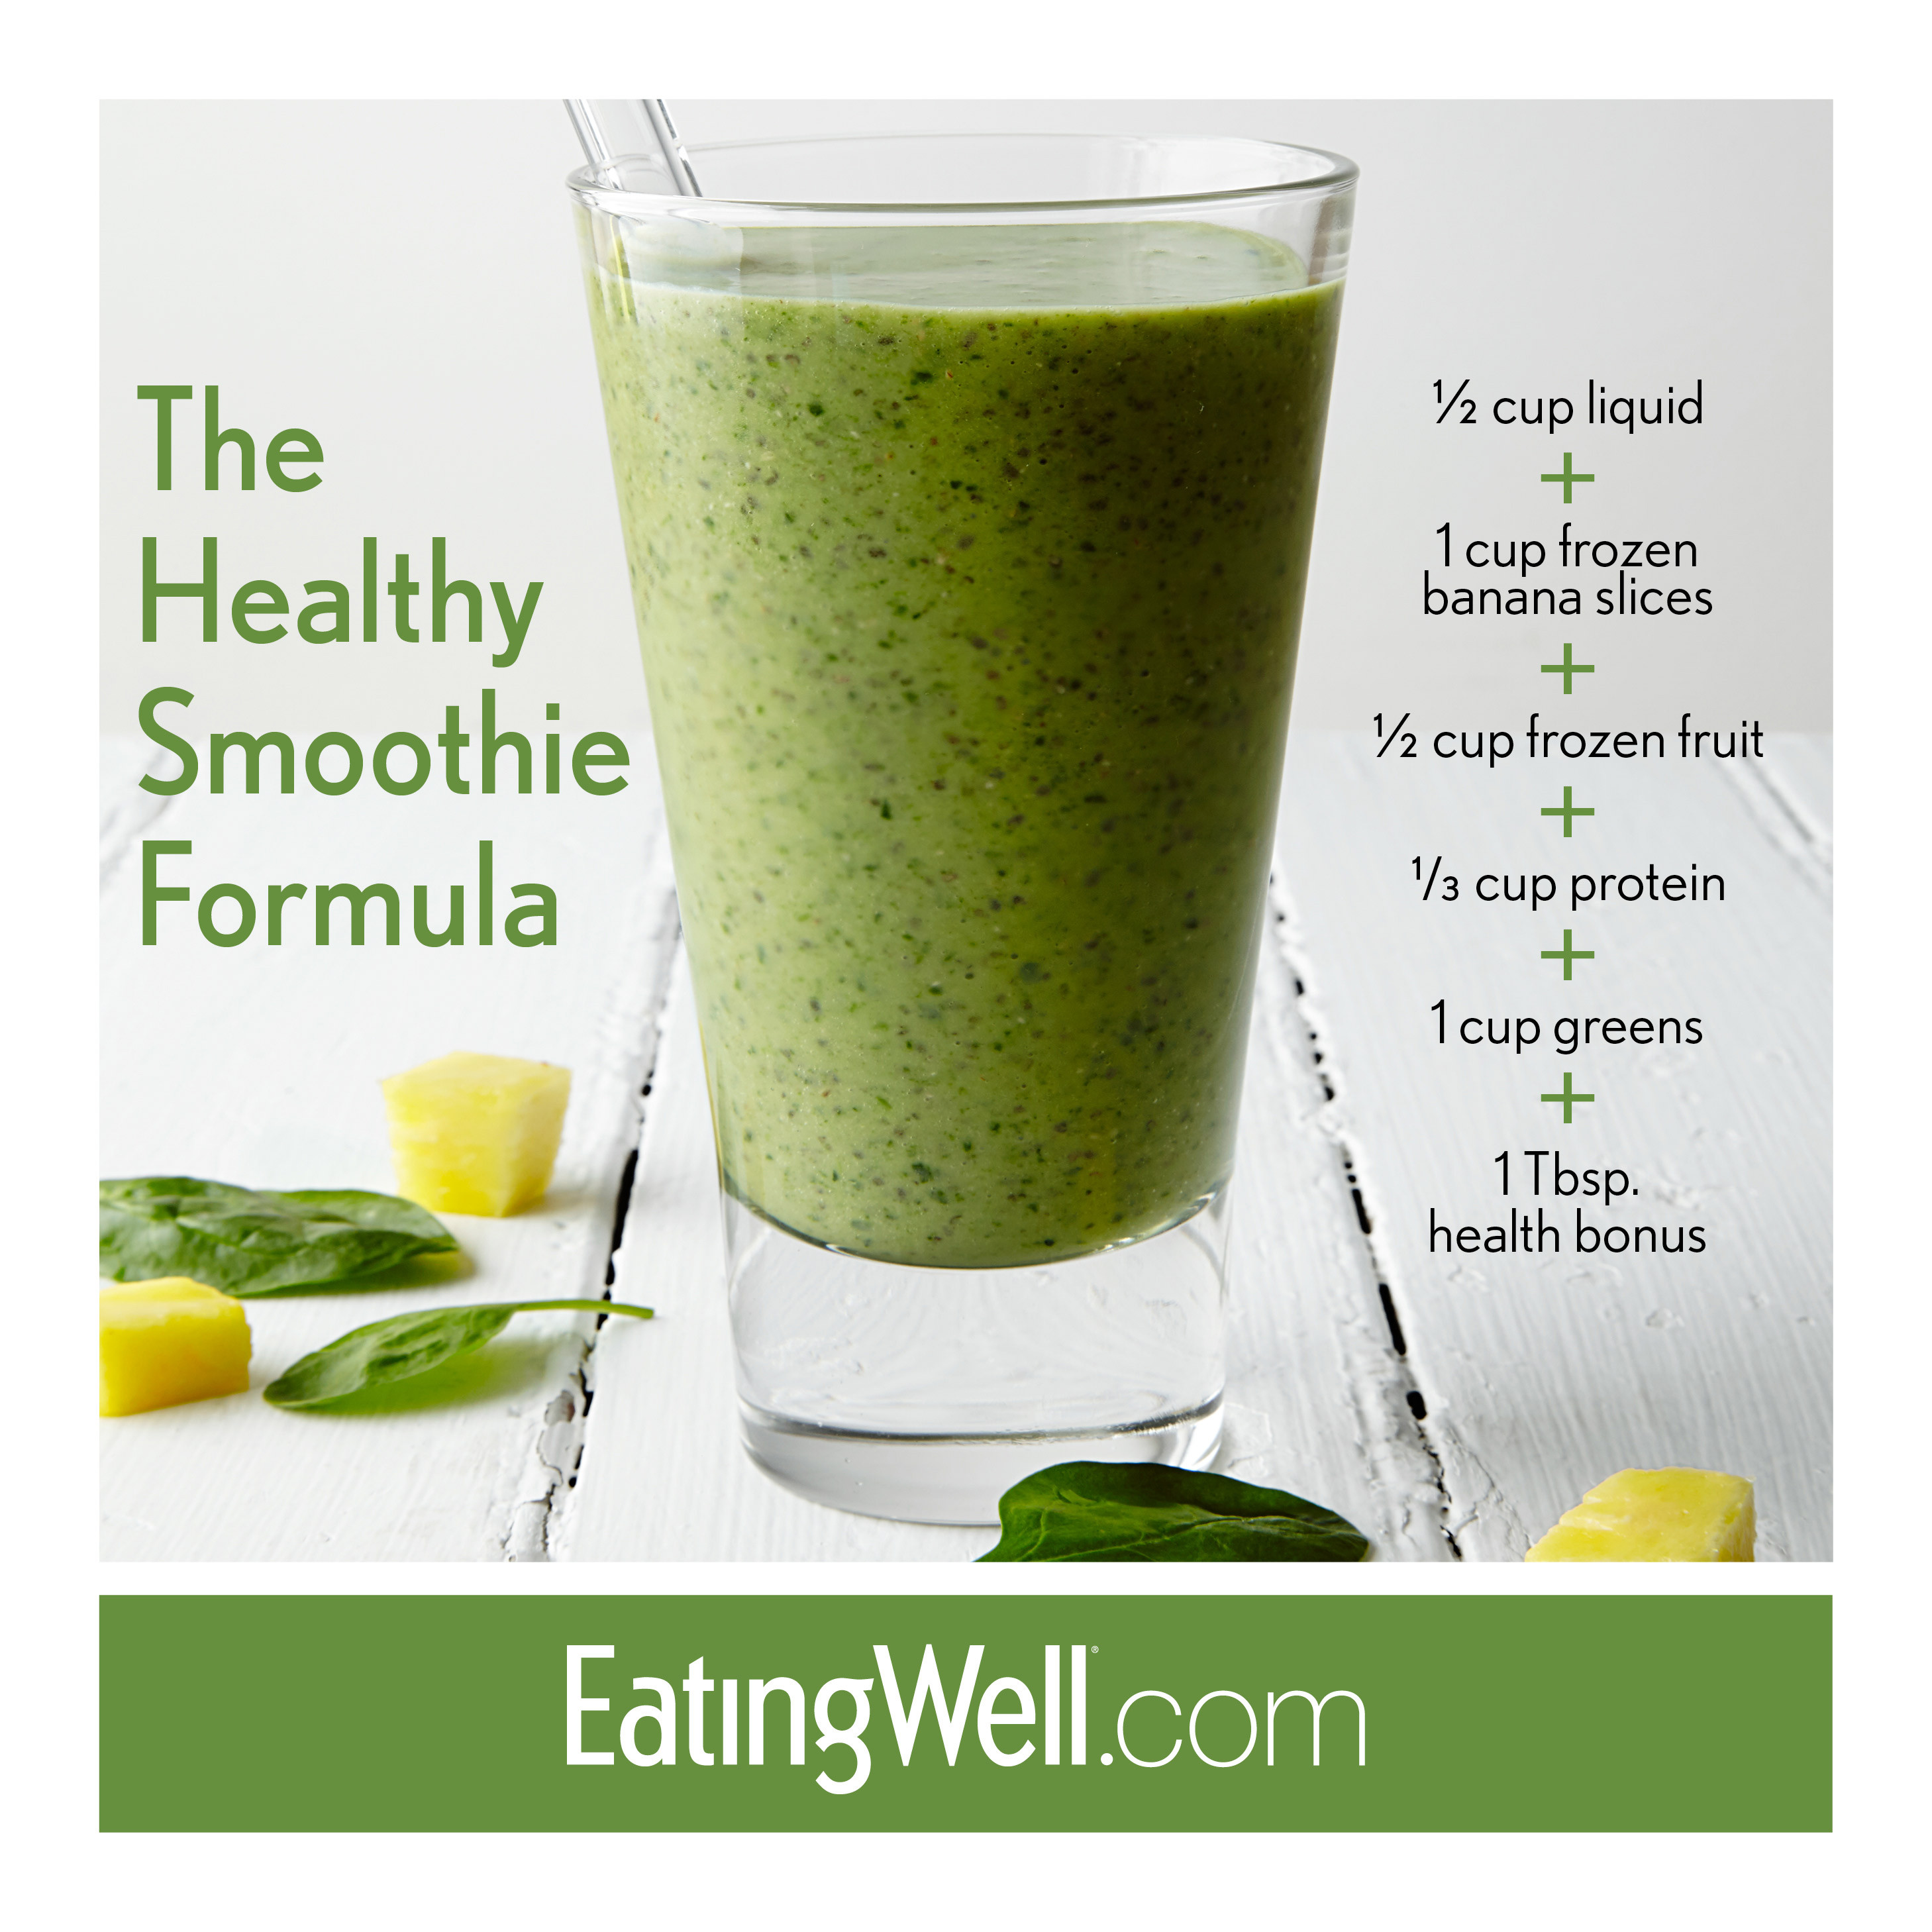 Healthy Green Smoothie Recipes
 The Ultimate Green Smoothie Recipe EatingWell